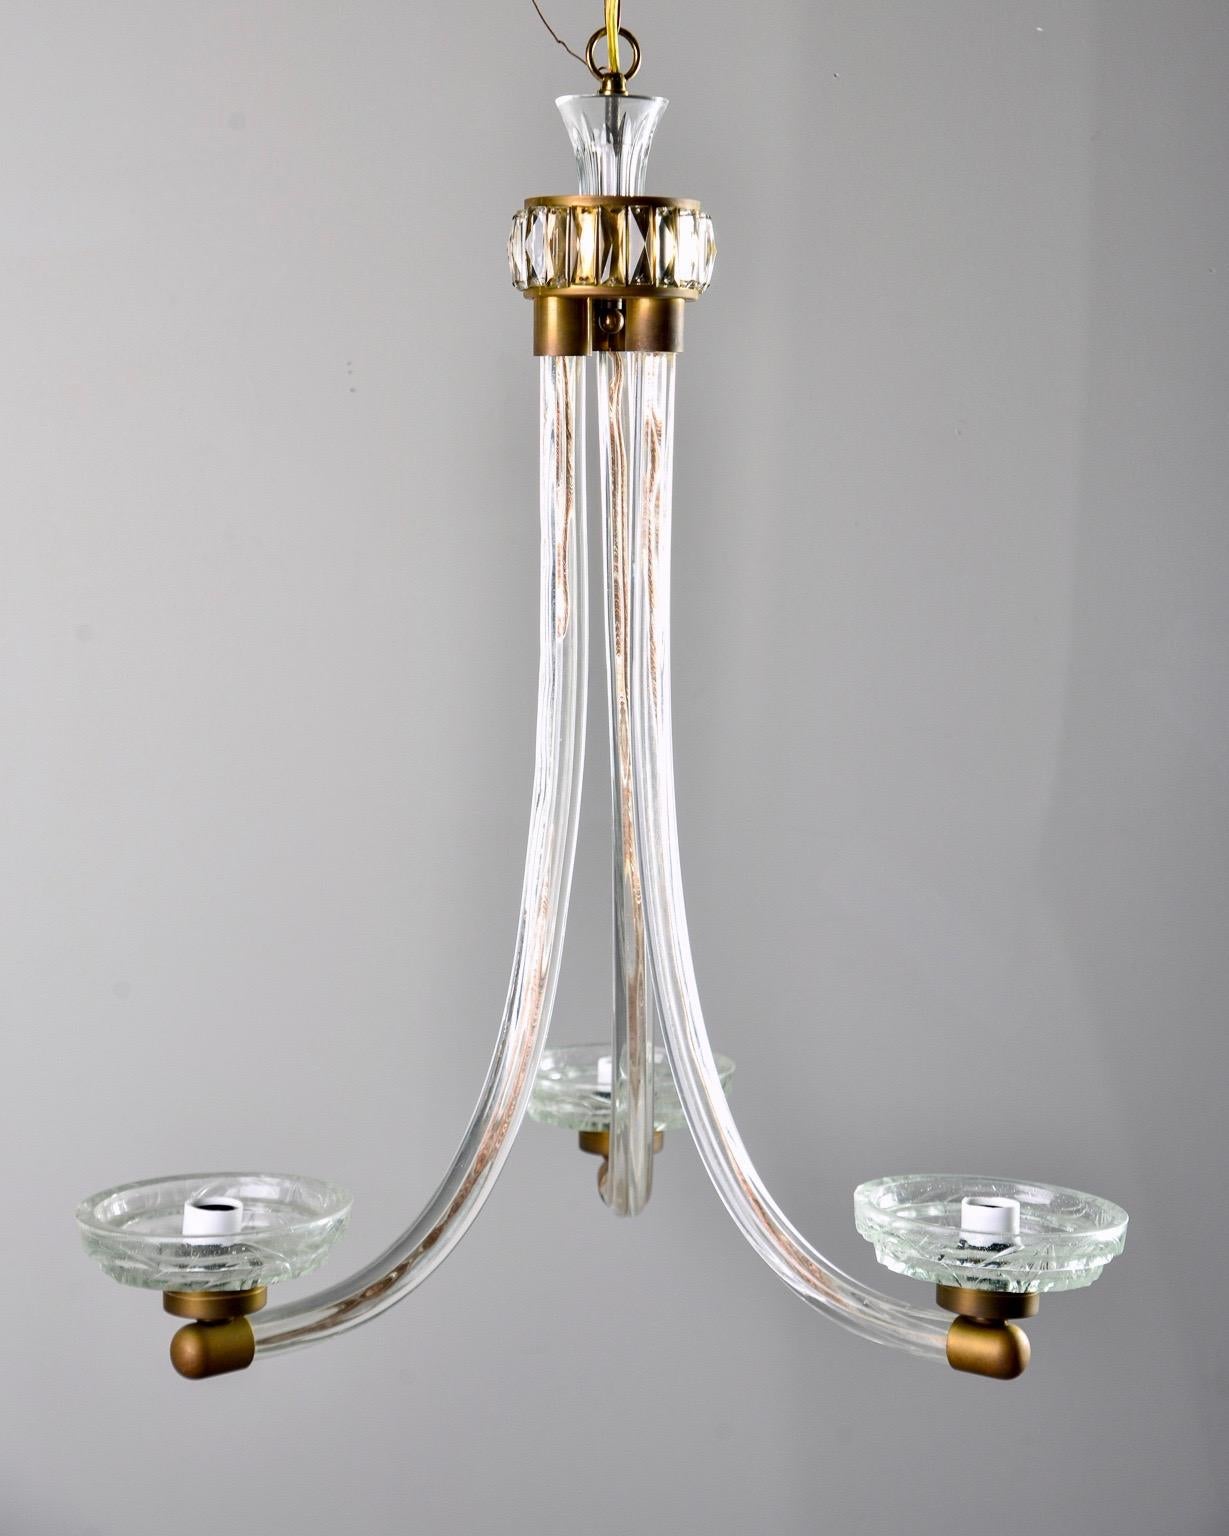 Art Deco / Modernist three-light chandelier features subtly curved clear glass arms with brass hardware, circa 1940. Etched glass bobeches and ceiling cap, faceted crystals surround the top brass cap. Three candelabra sized sockets. New wiring for